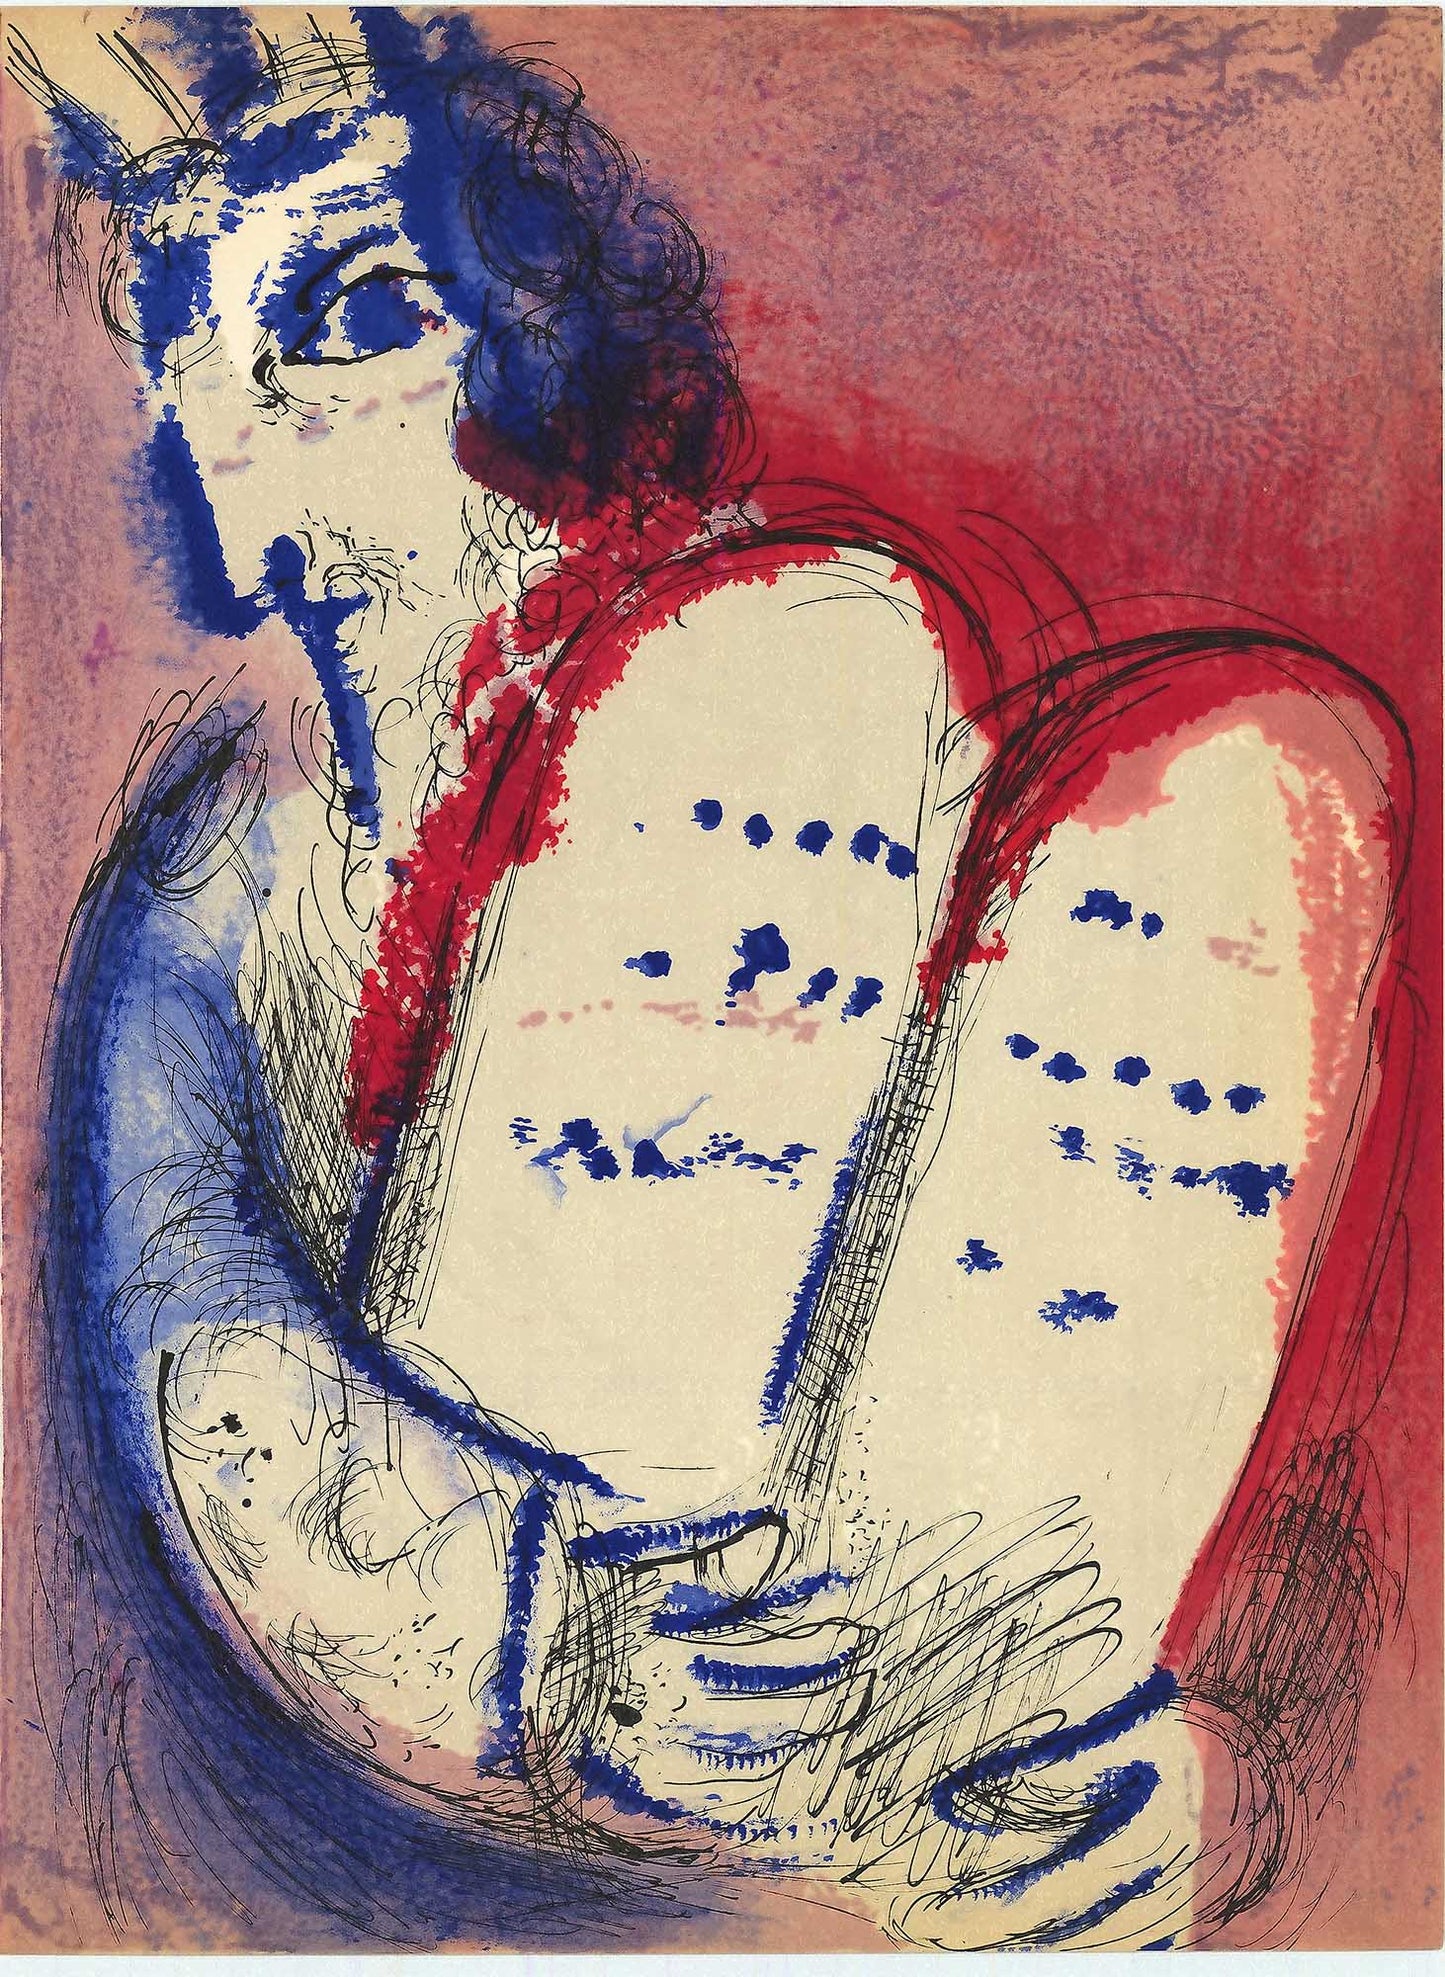 Marc Chagall Moses lithograph  Verve – the bible